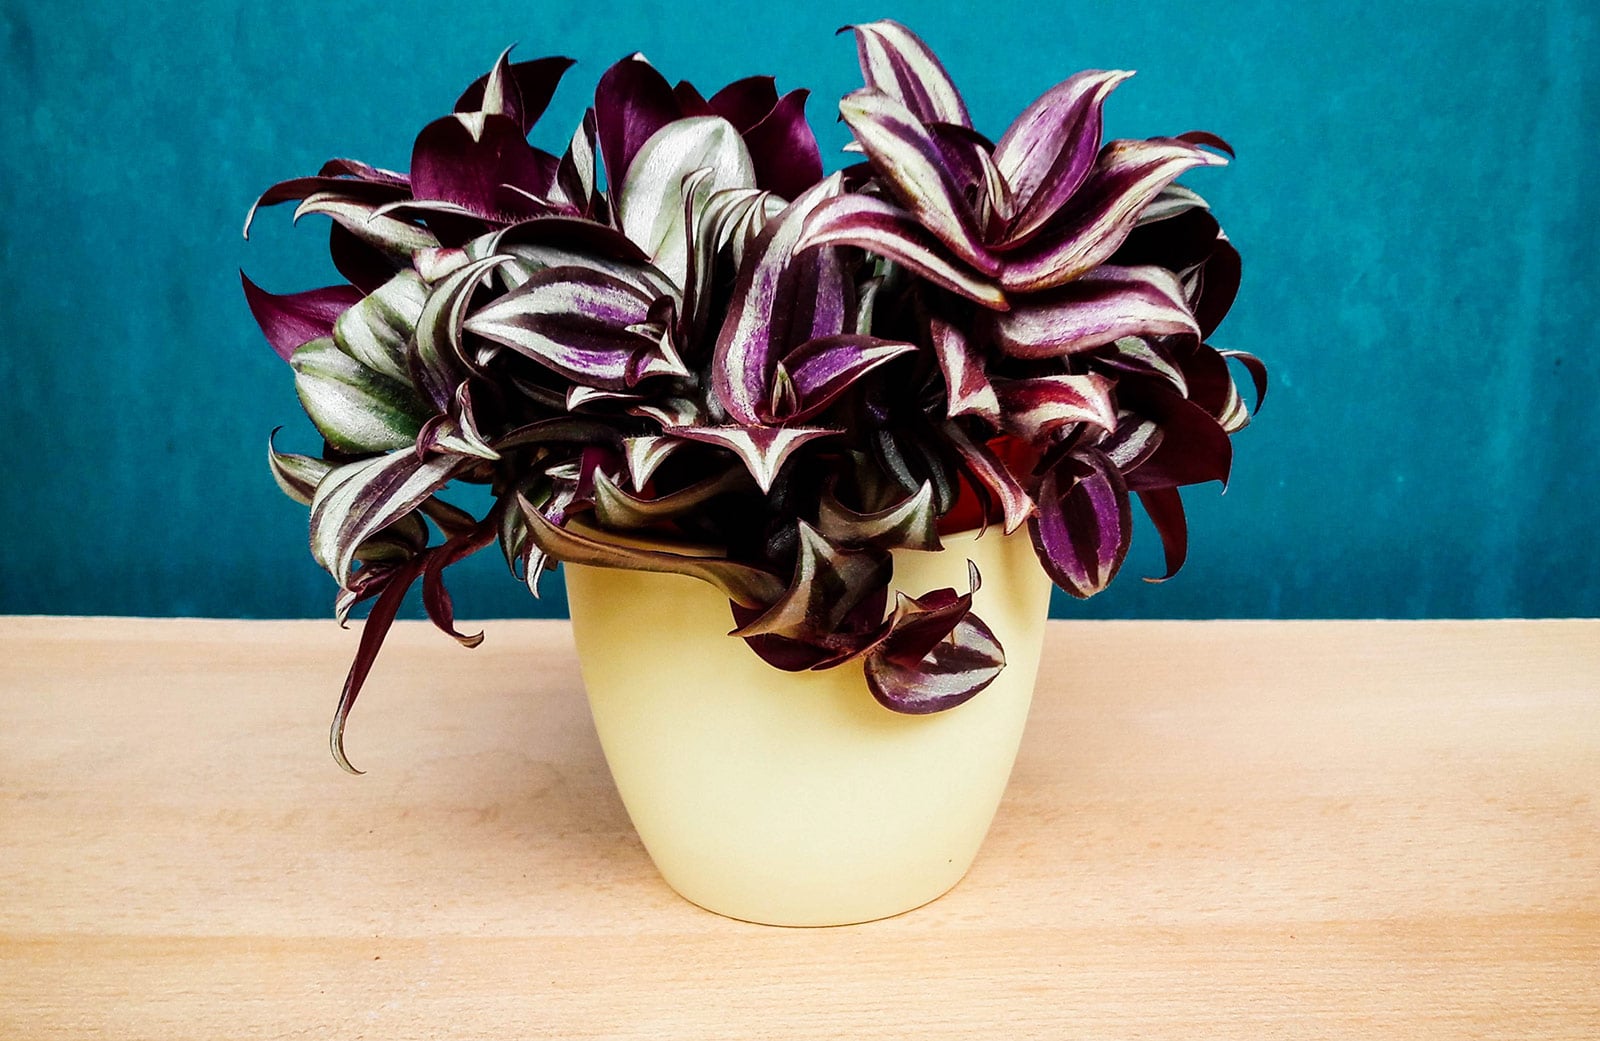 Tradescantia zebrina (wandering Jew or inch plant) with deep purple, green, and cream foliage in a yellow container, shot against a blue background